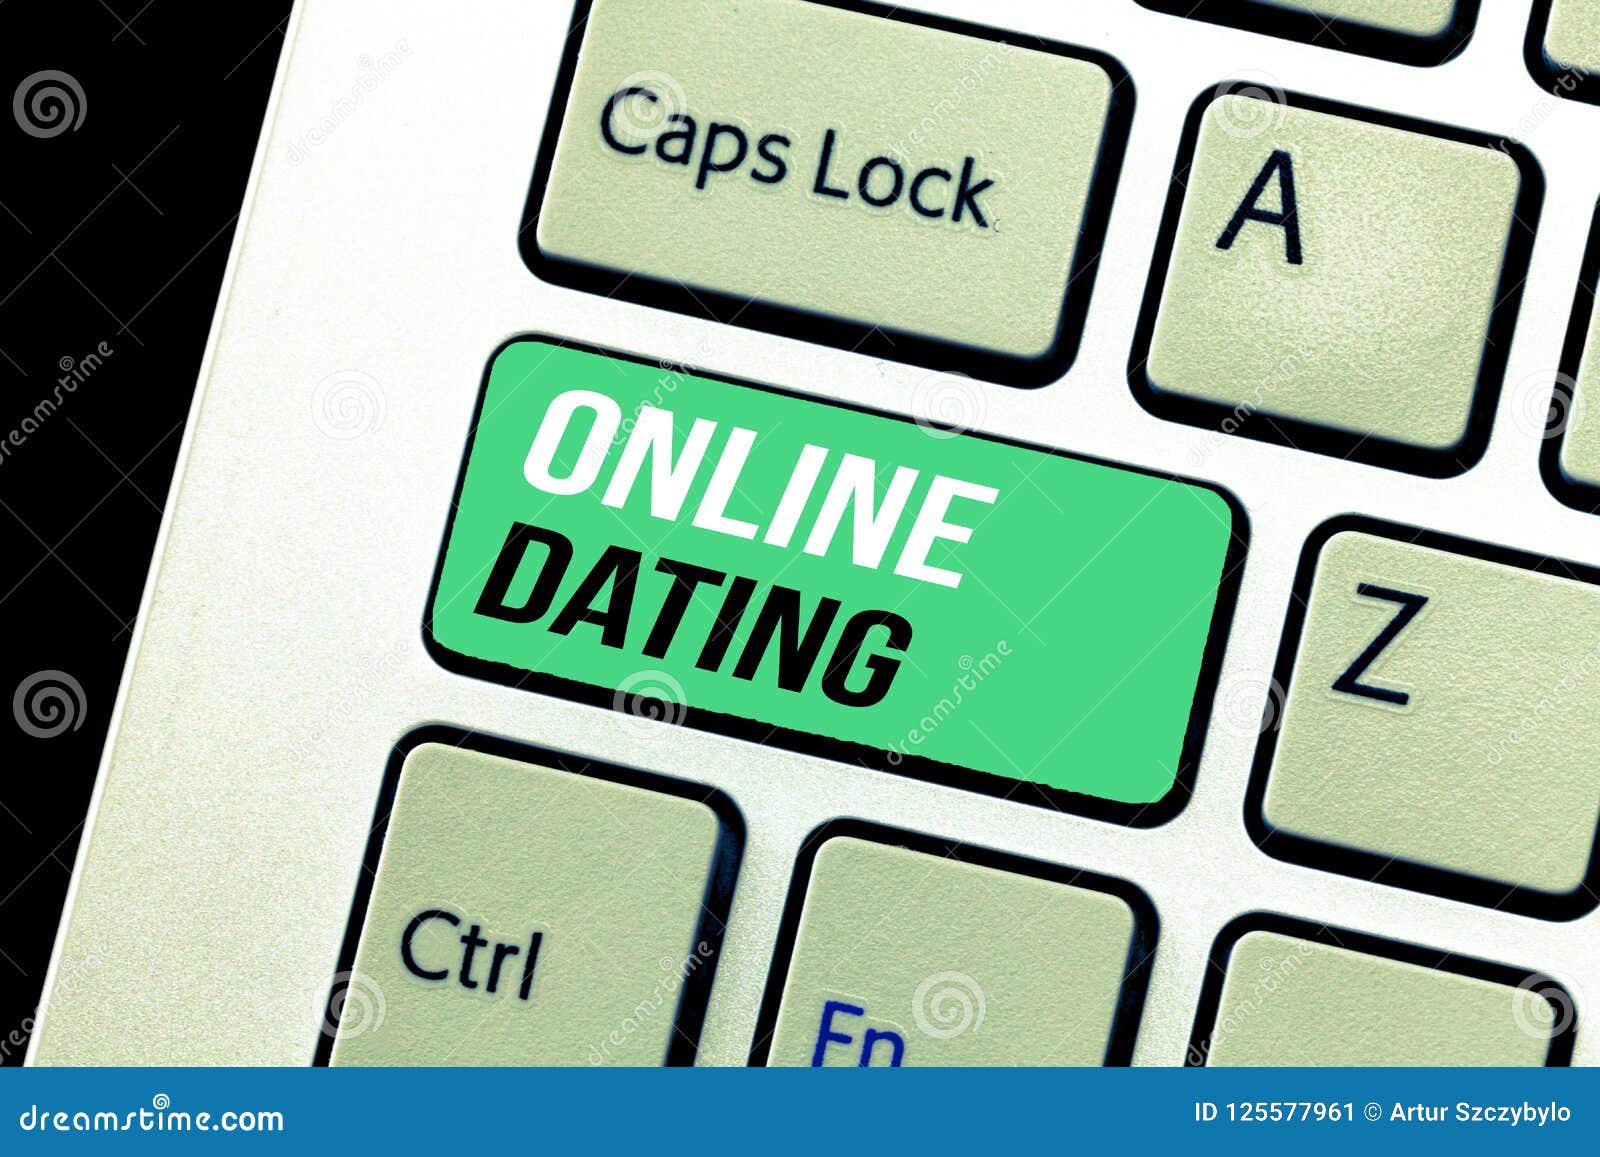 Dating is more Fun for peoples, For Professionals its make a Business